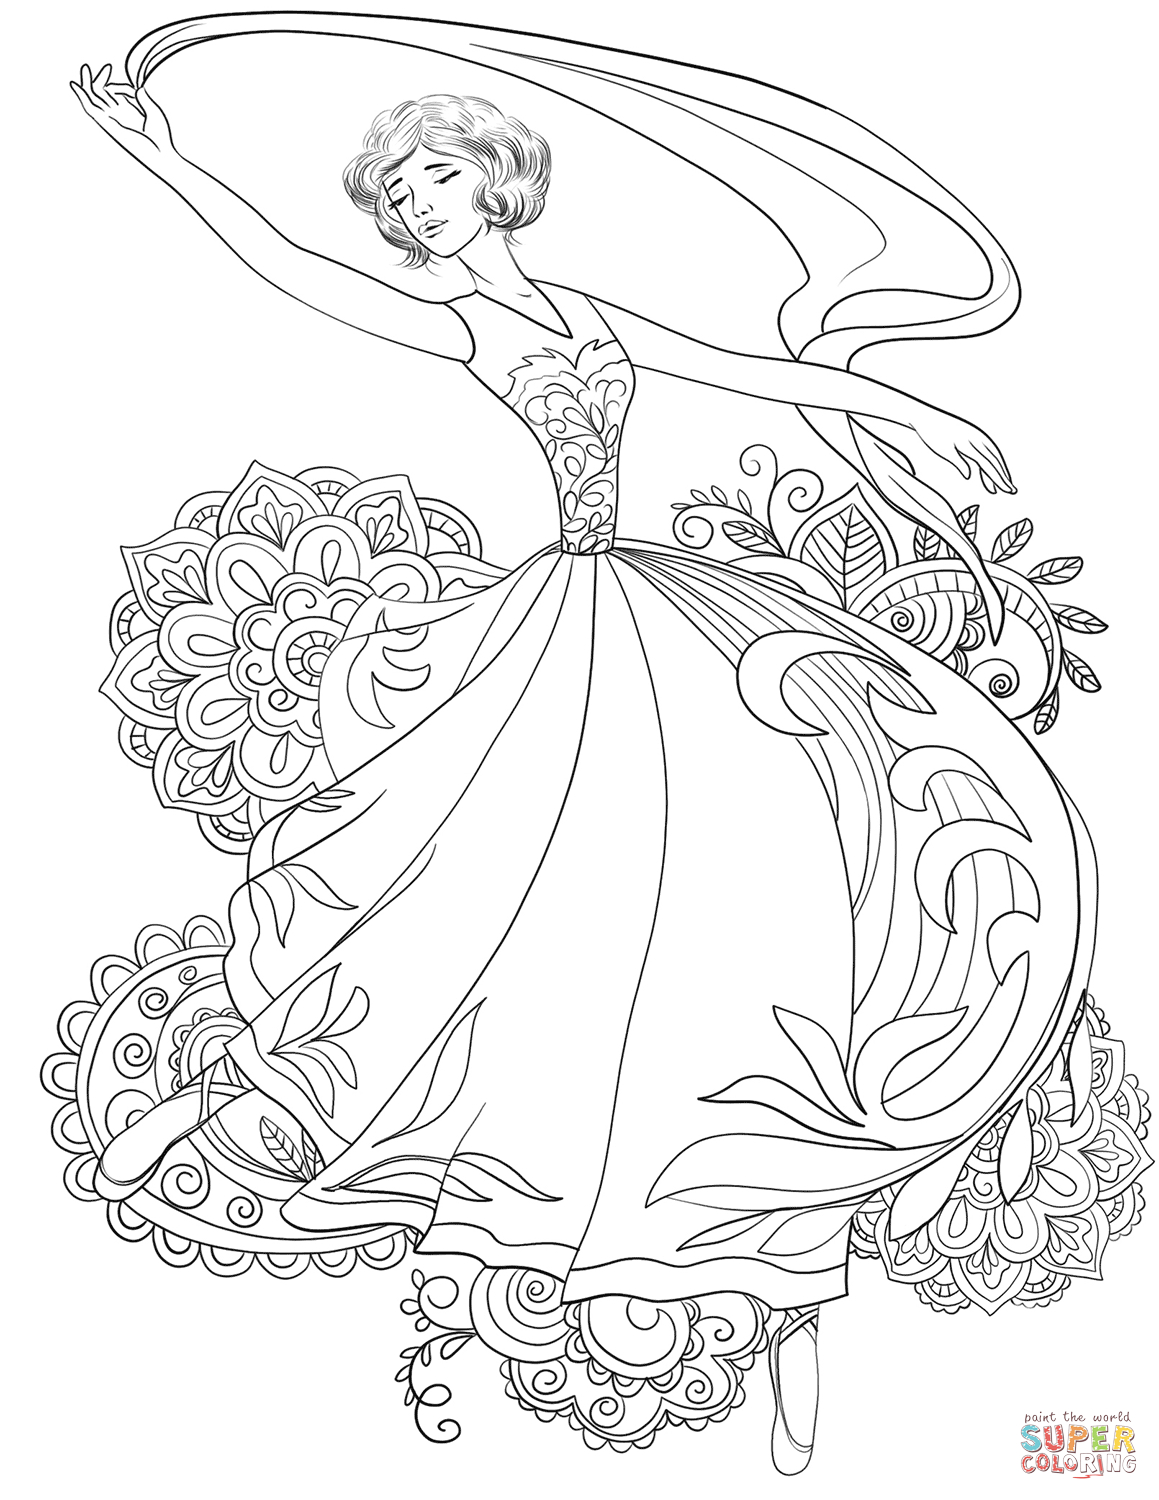 Dancing Coloring Pages Woman Dancing With Shawl Coloring Page Free Printable Coloring Pages